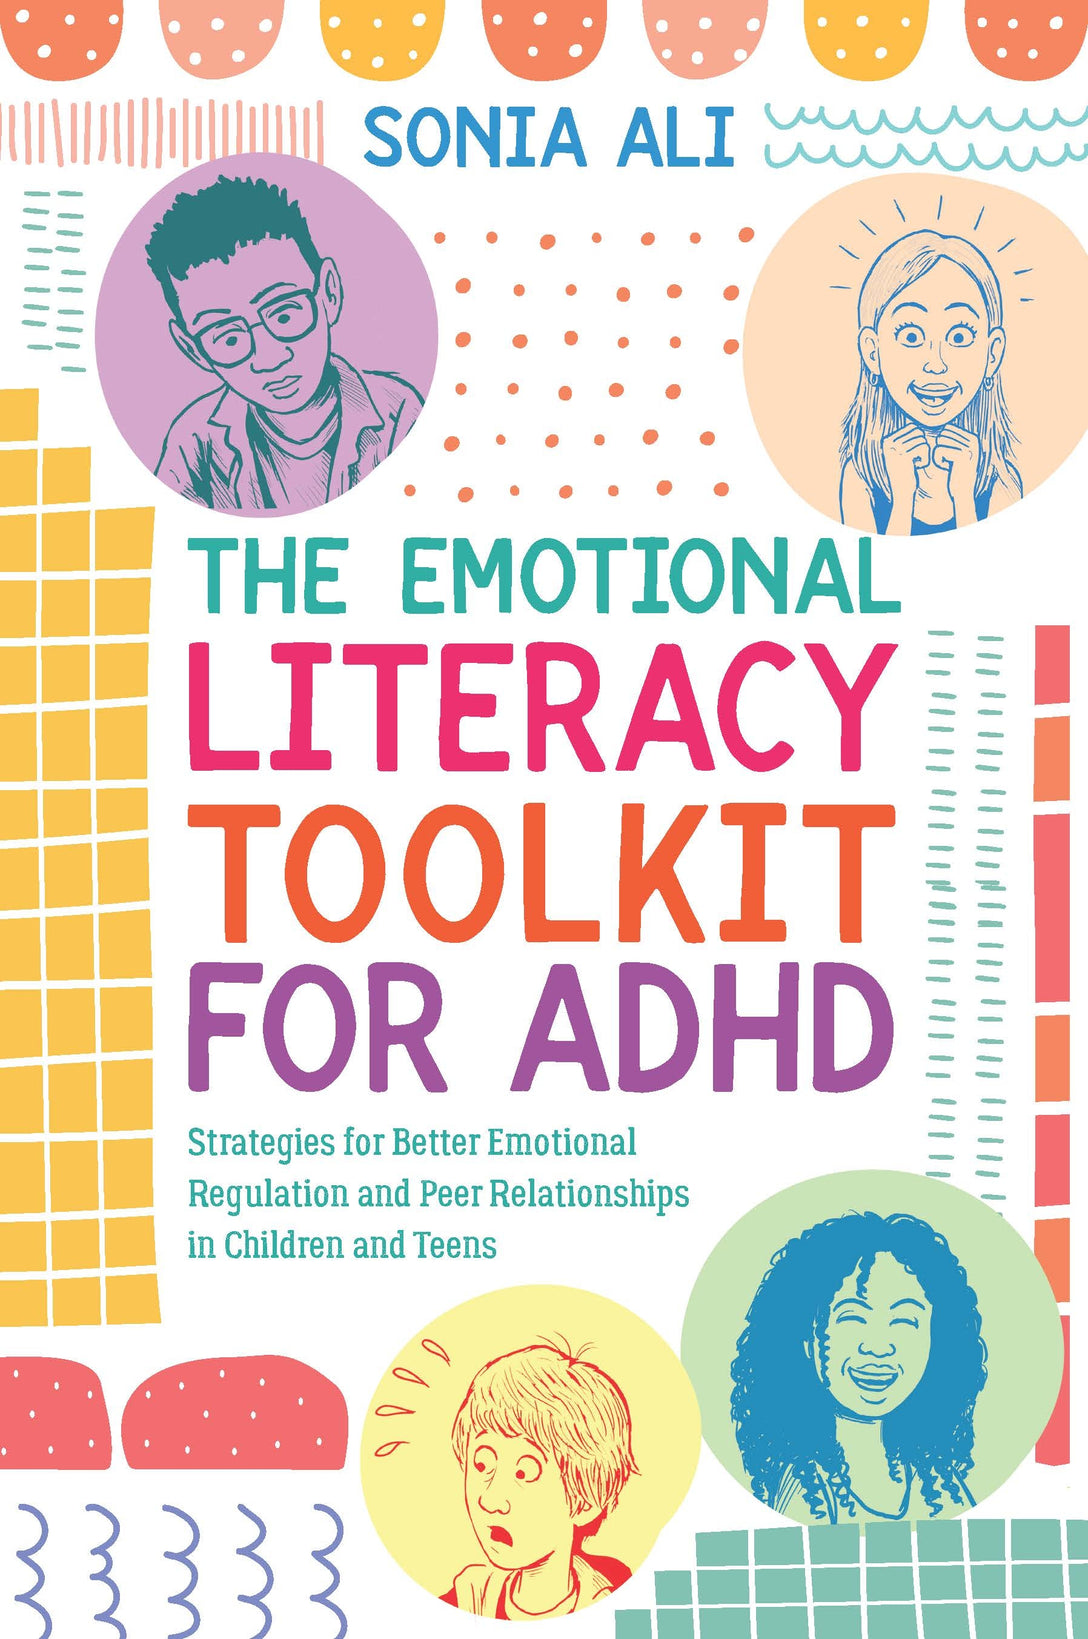 The Emotional Literacy Toolkit for ADHD by Sonia Ali